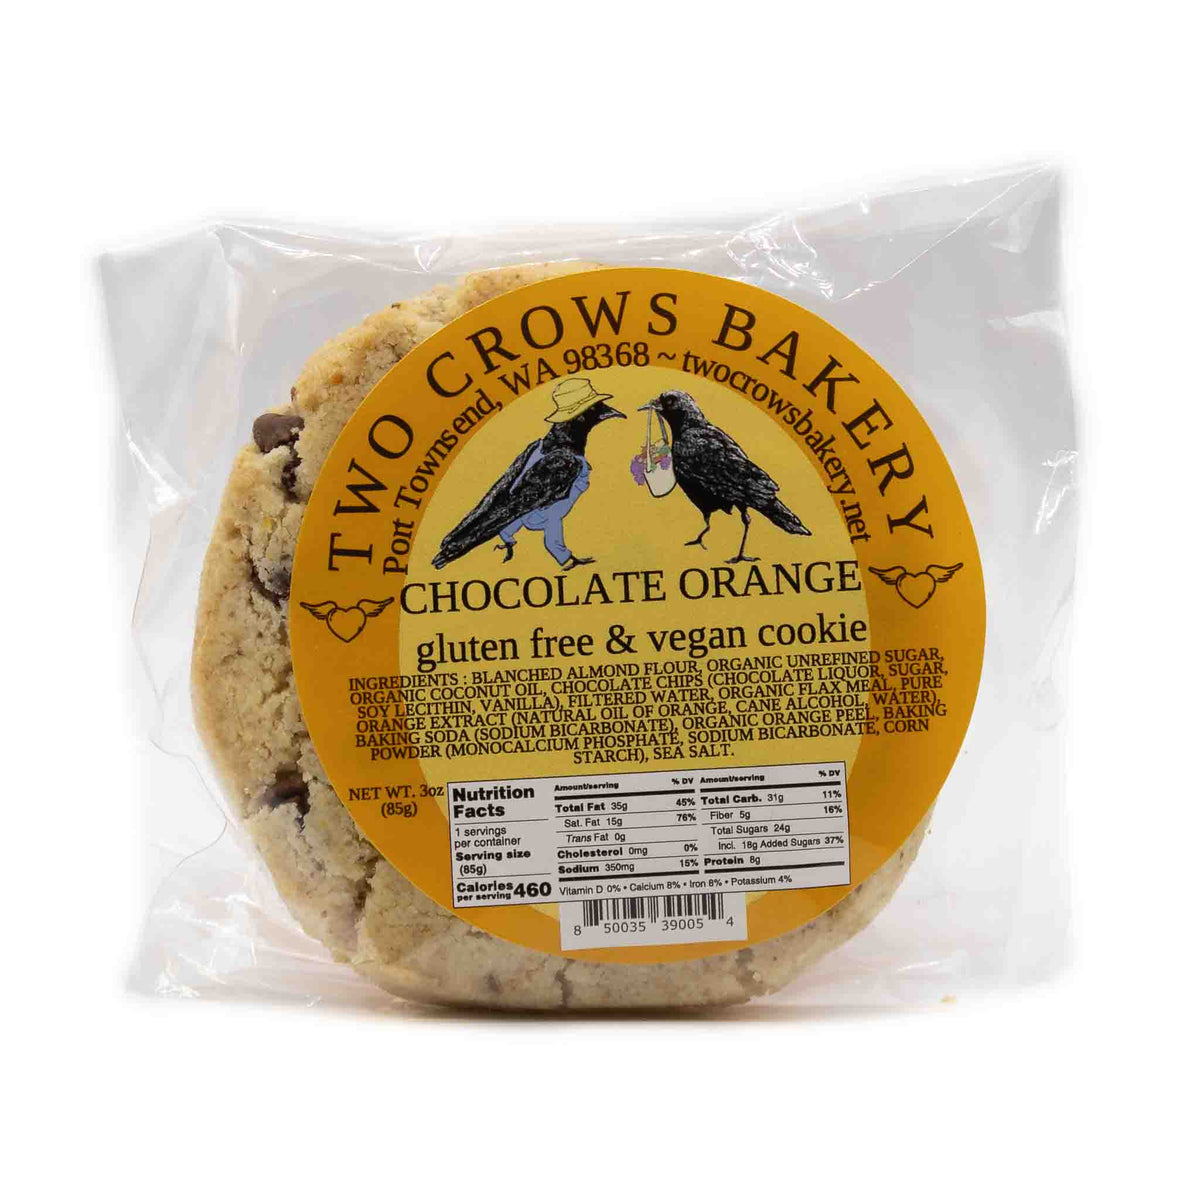 Two Crows Cookie Chocolate Orange